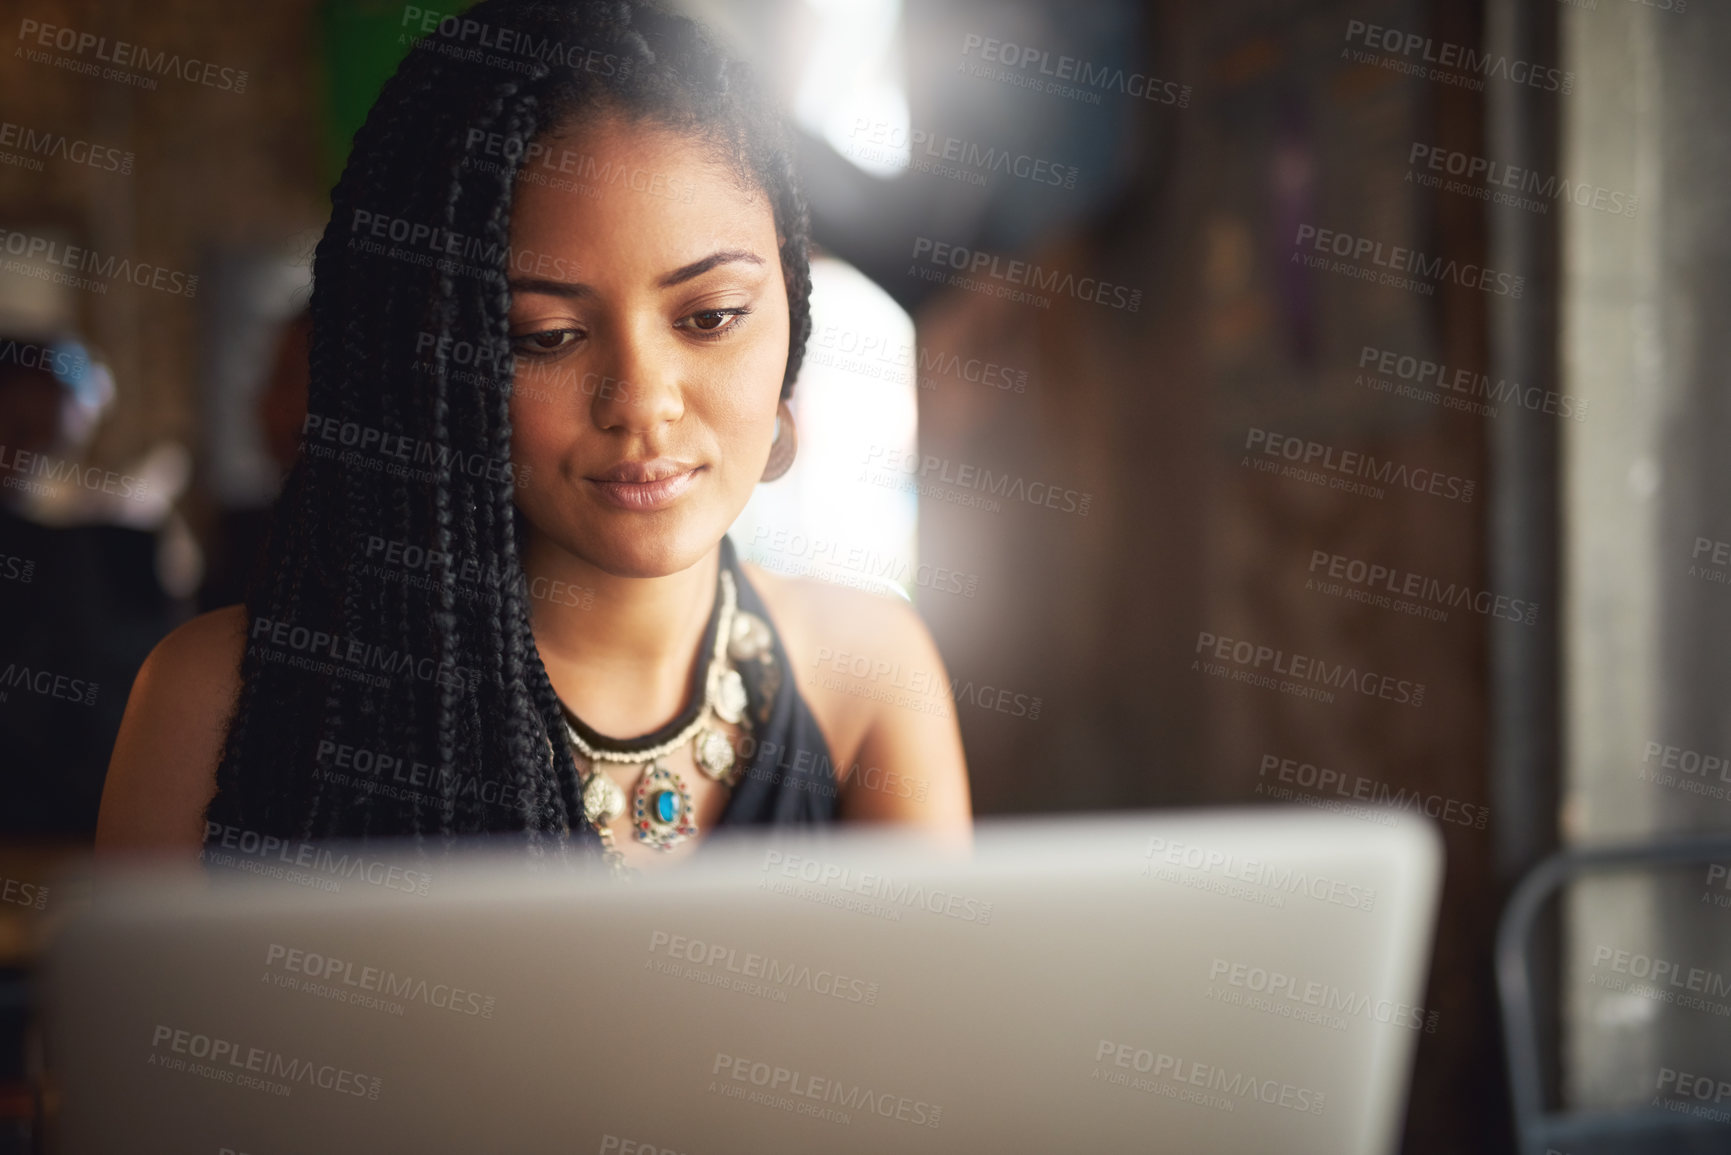 Buy stock photo Cropped shot of an attractive young woman using her laptop in a coffee shop